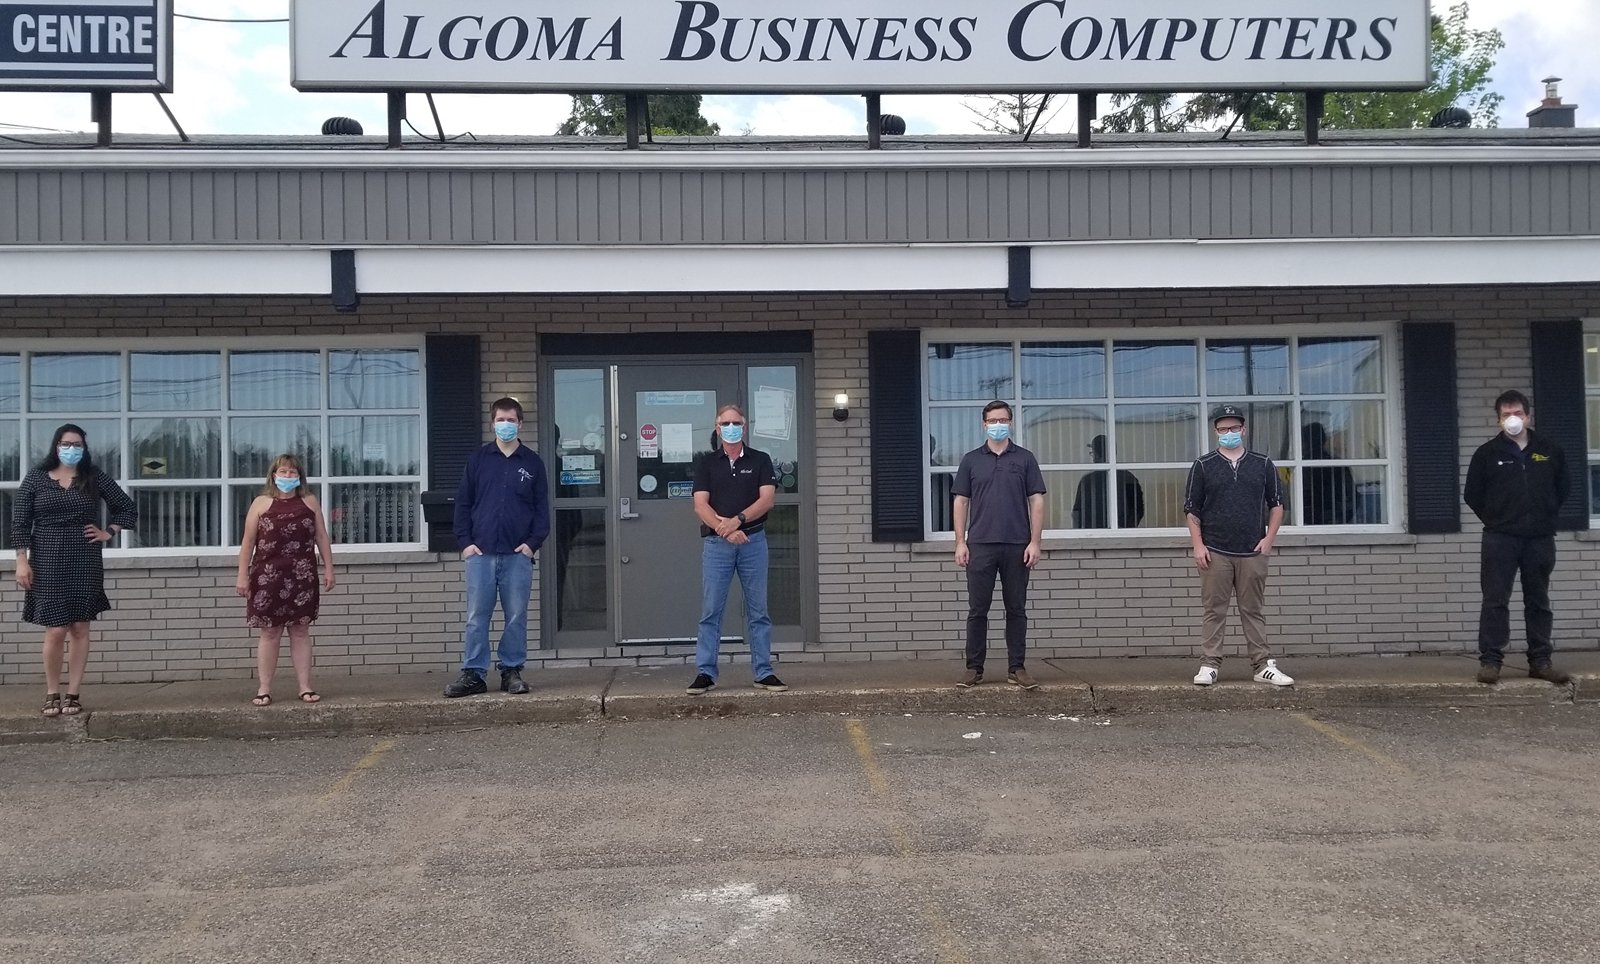 Staff from Algoma Business Computers